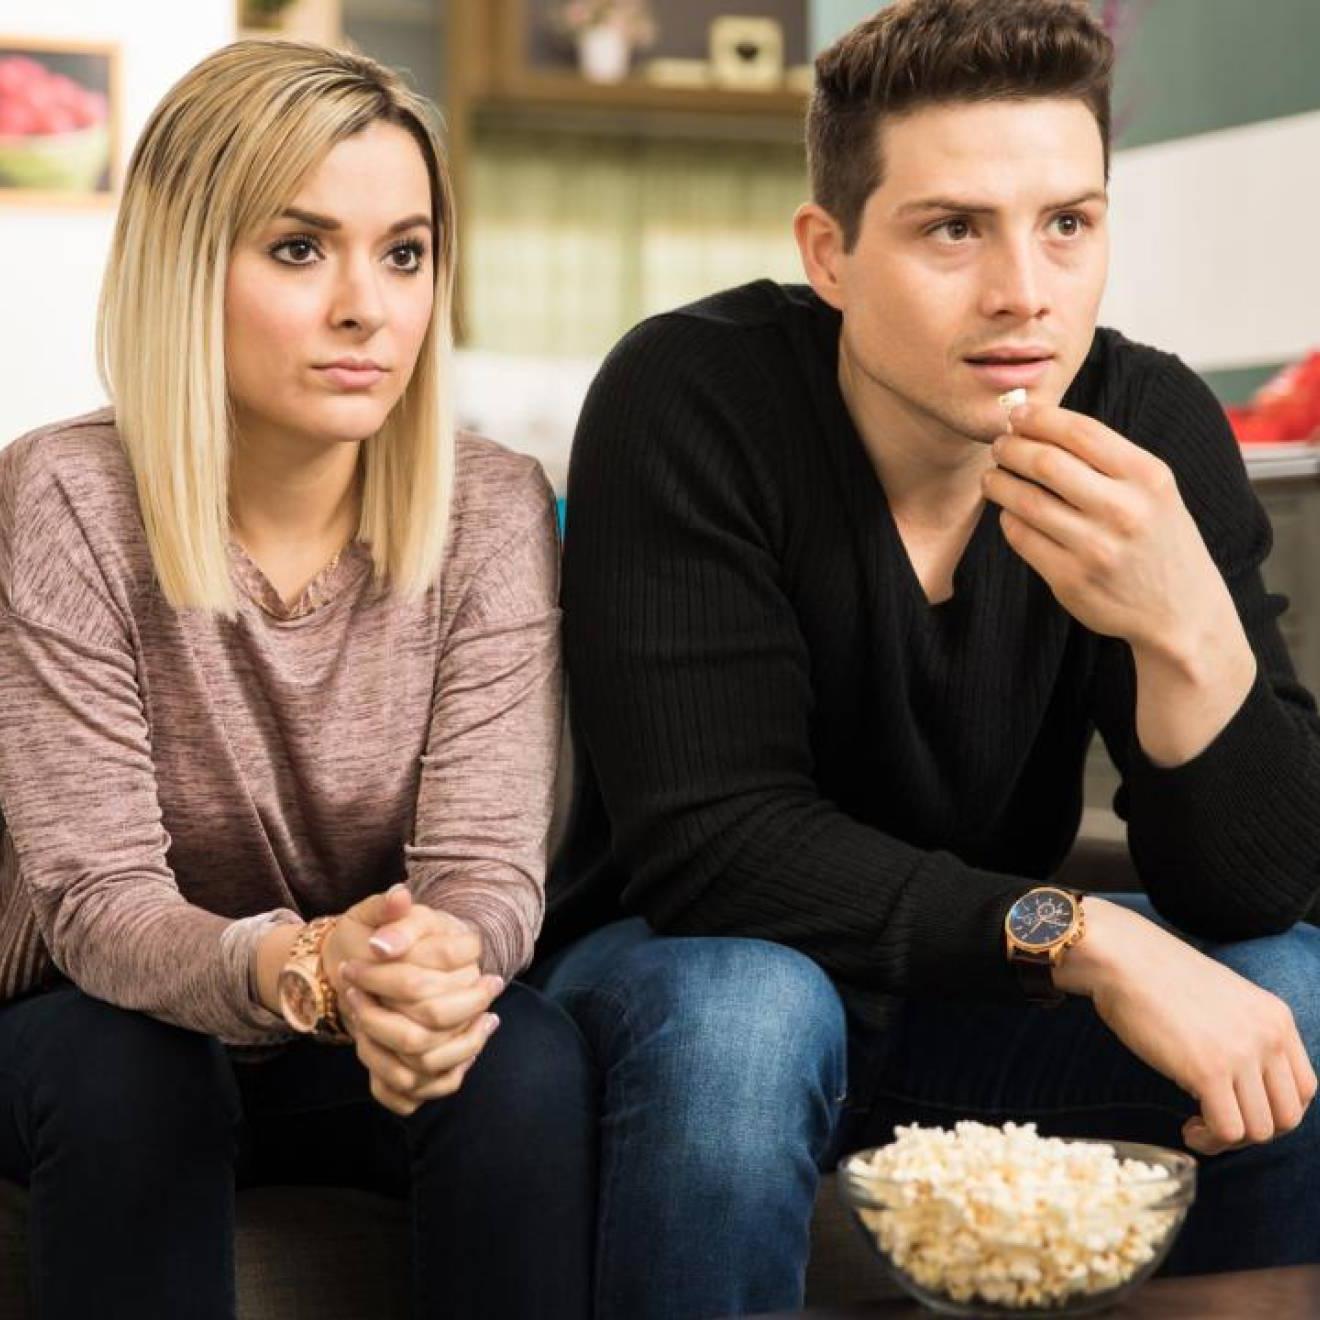 A white man and a white woman watching TV together, looking somber